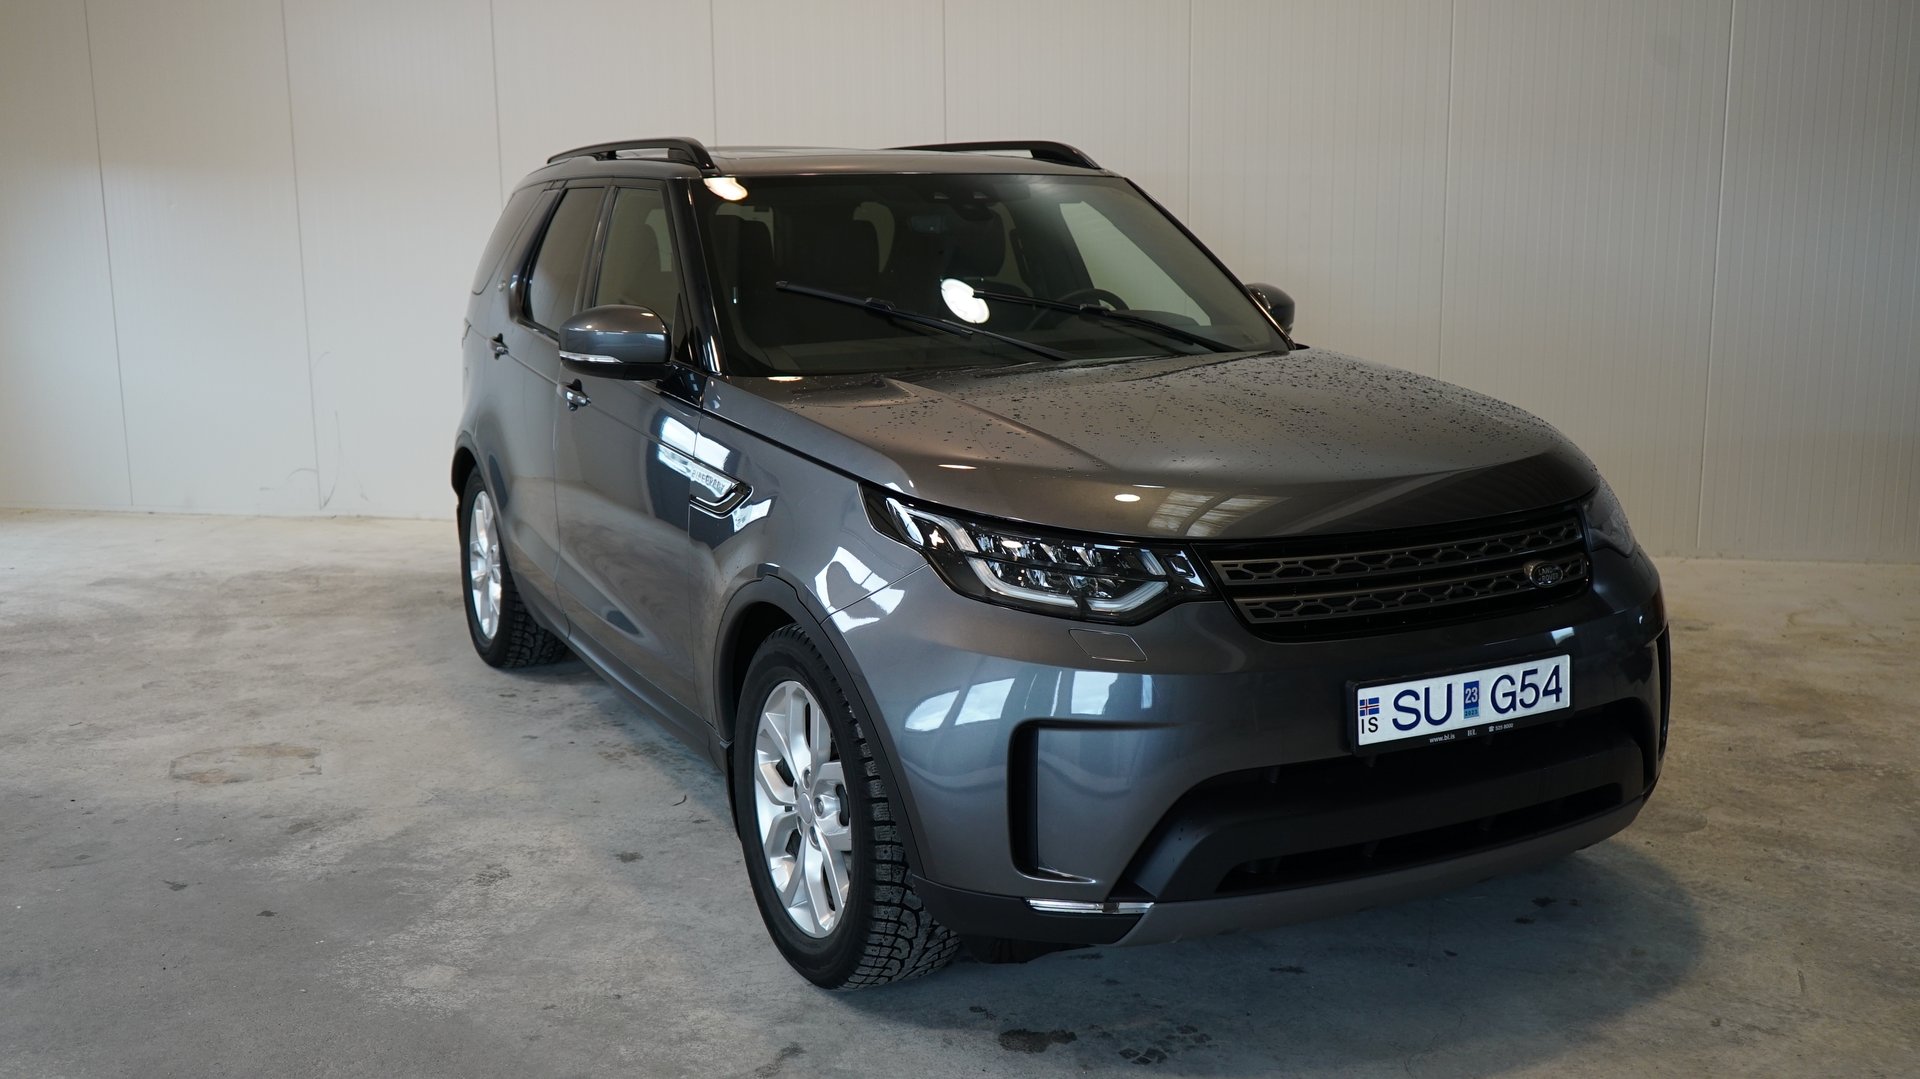 Land Rover Discovery 5 4x4 Diesel 7 seats